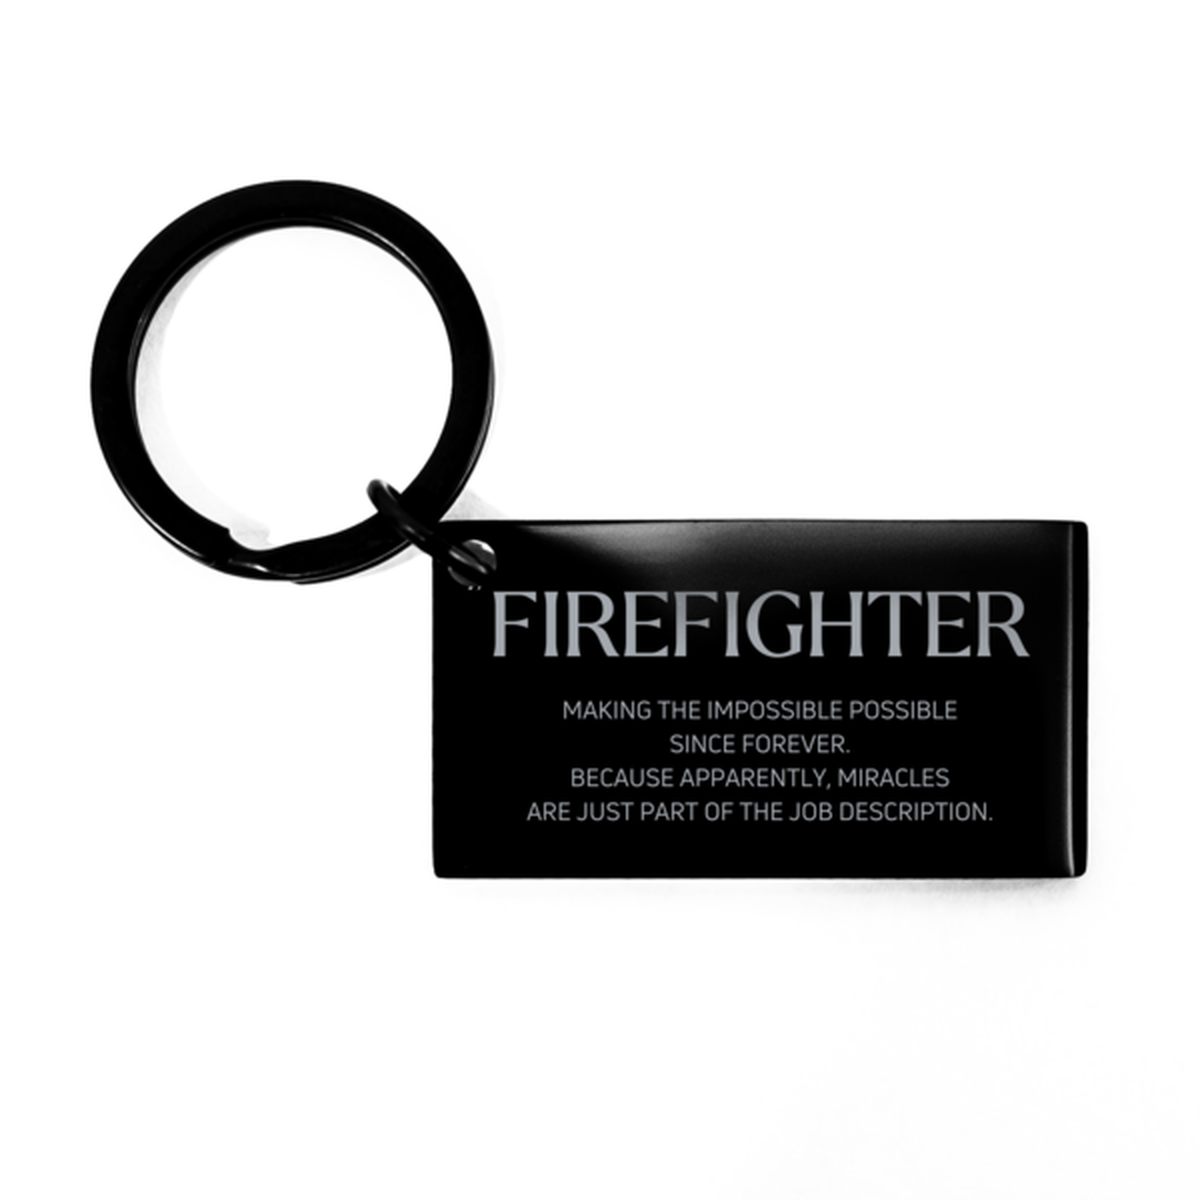 Funny Firefighter Gifts, Miracles are just part of the job description, Inspirational Birthday Keychain For Firefighter, Men, Women, Coworkers, Friends, Boss